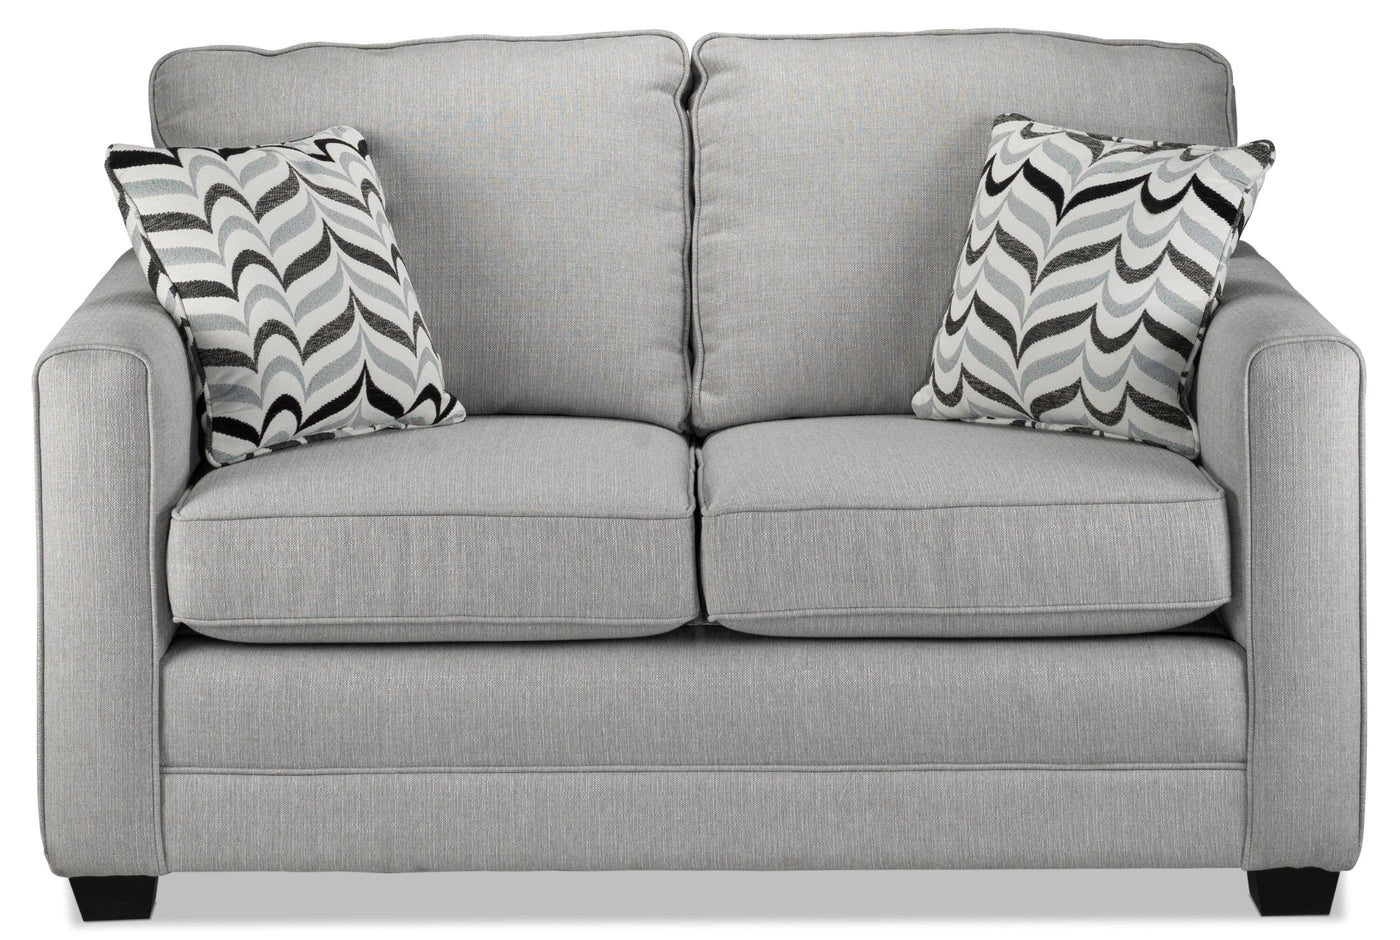 Penelope Sofa, Loveseat and Chair and a Half Set - Grey